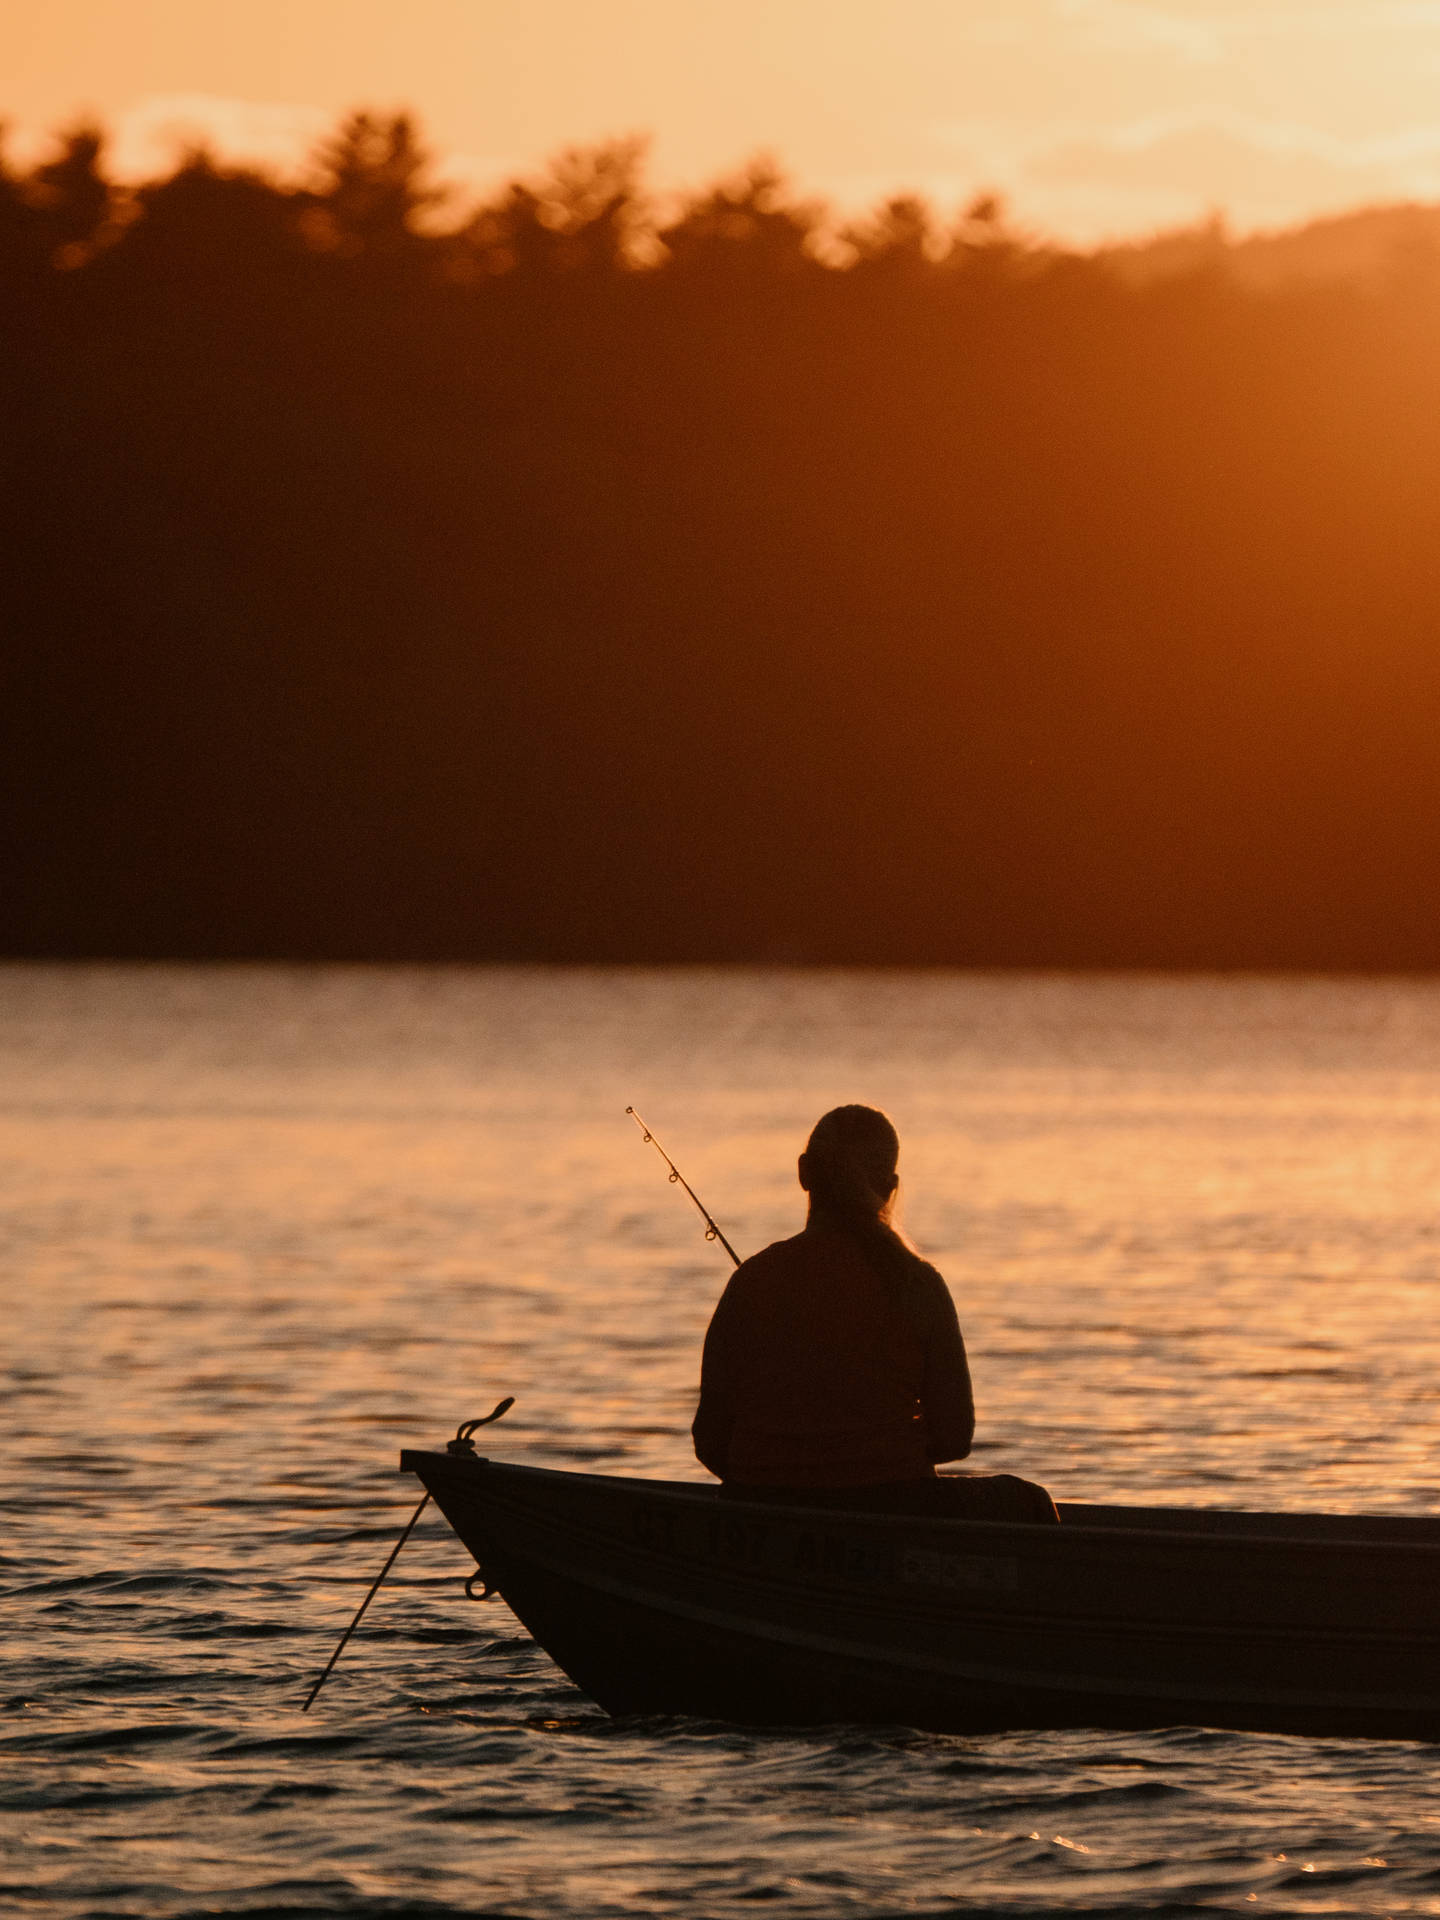 An early morning angler enjoying the tranquility of a tranquil fishing boat. Wallpaper